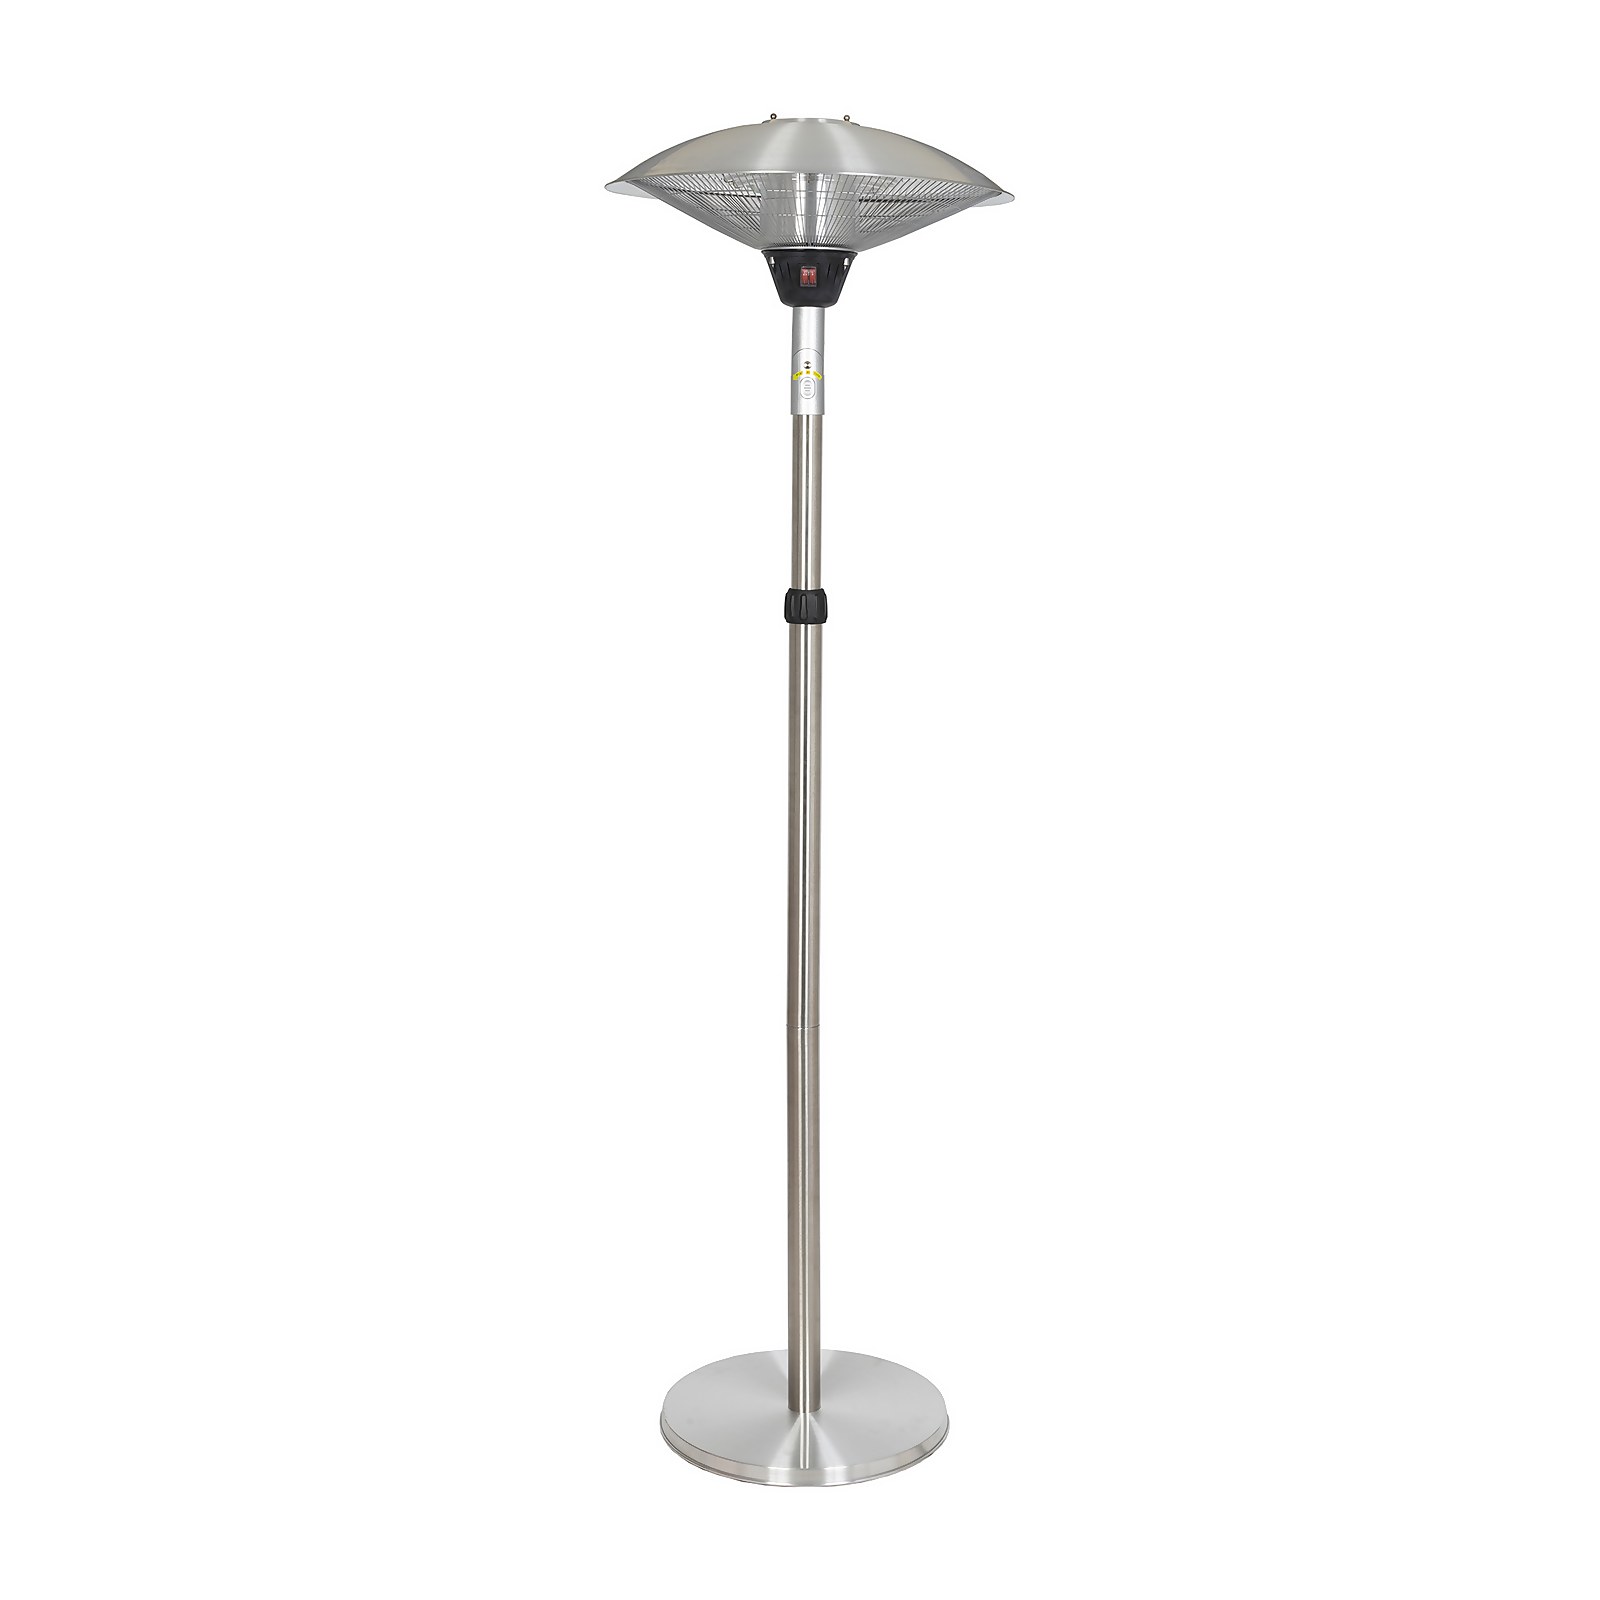 Photo of Silver Electric Freestanding Adjustable Patio Heater